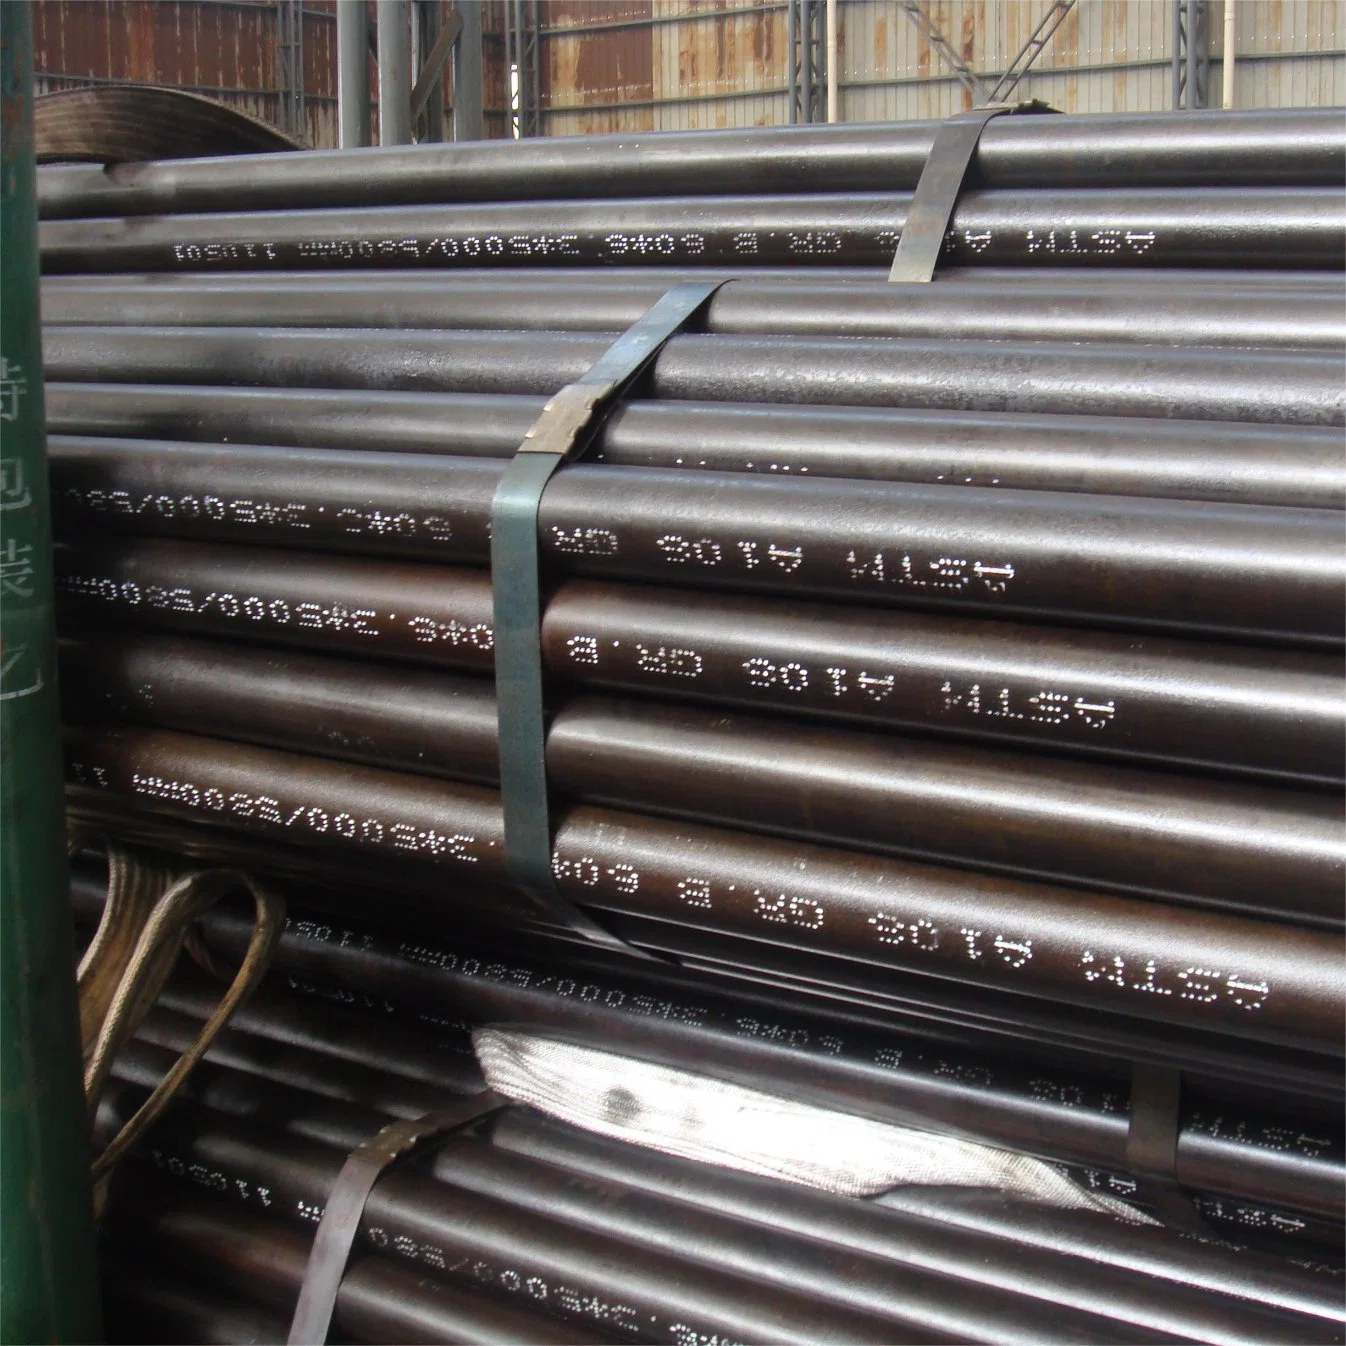 Apl 5L/ASTM A106 Gr. B Smls Steel Pipe Production Method Hot Rolling Hot Working or Cold Drawing Cold Working Seamless Steel Tube